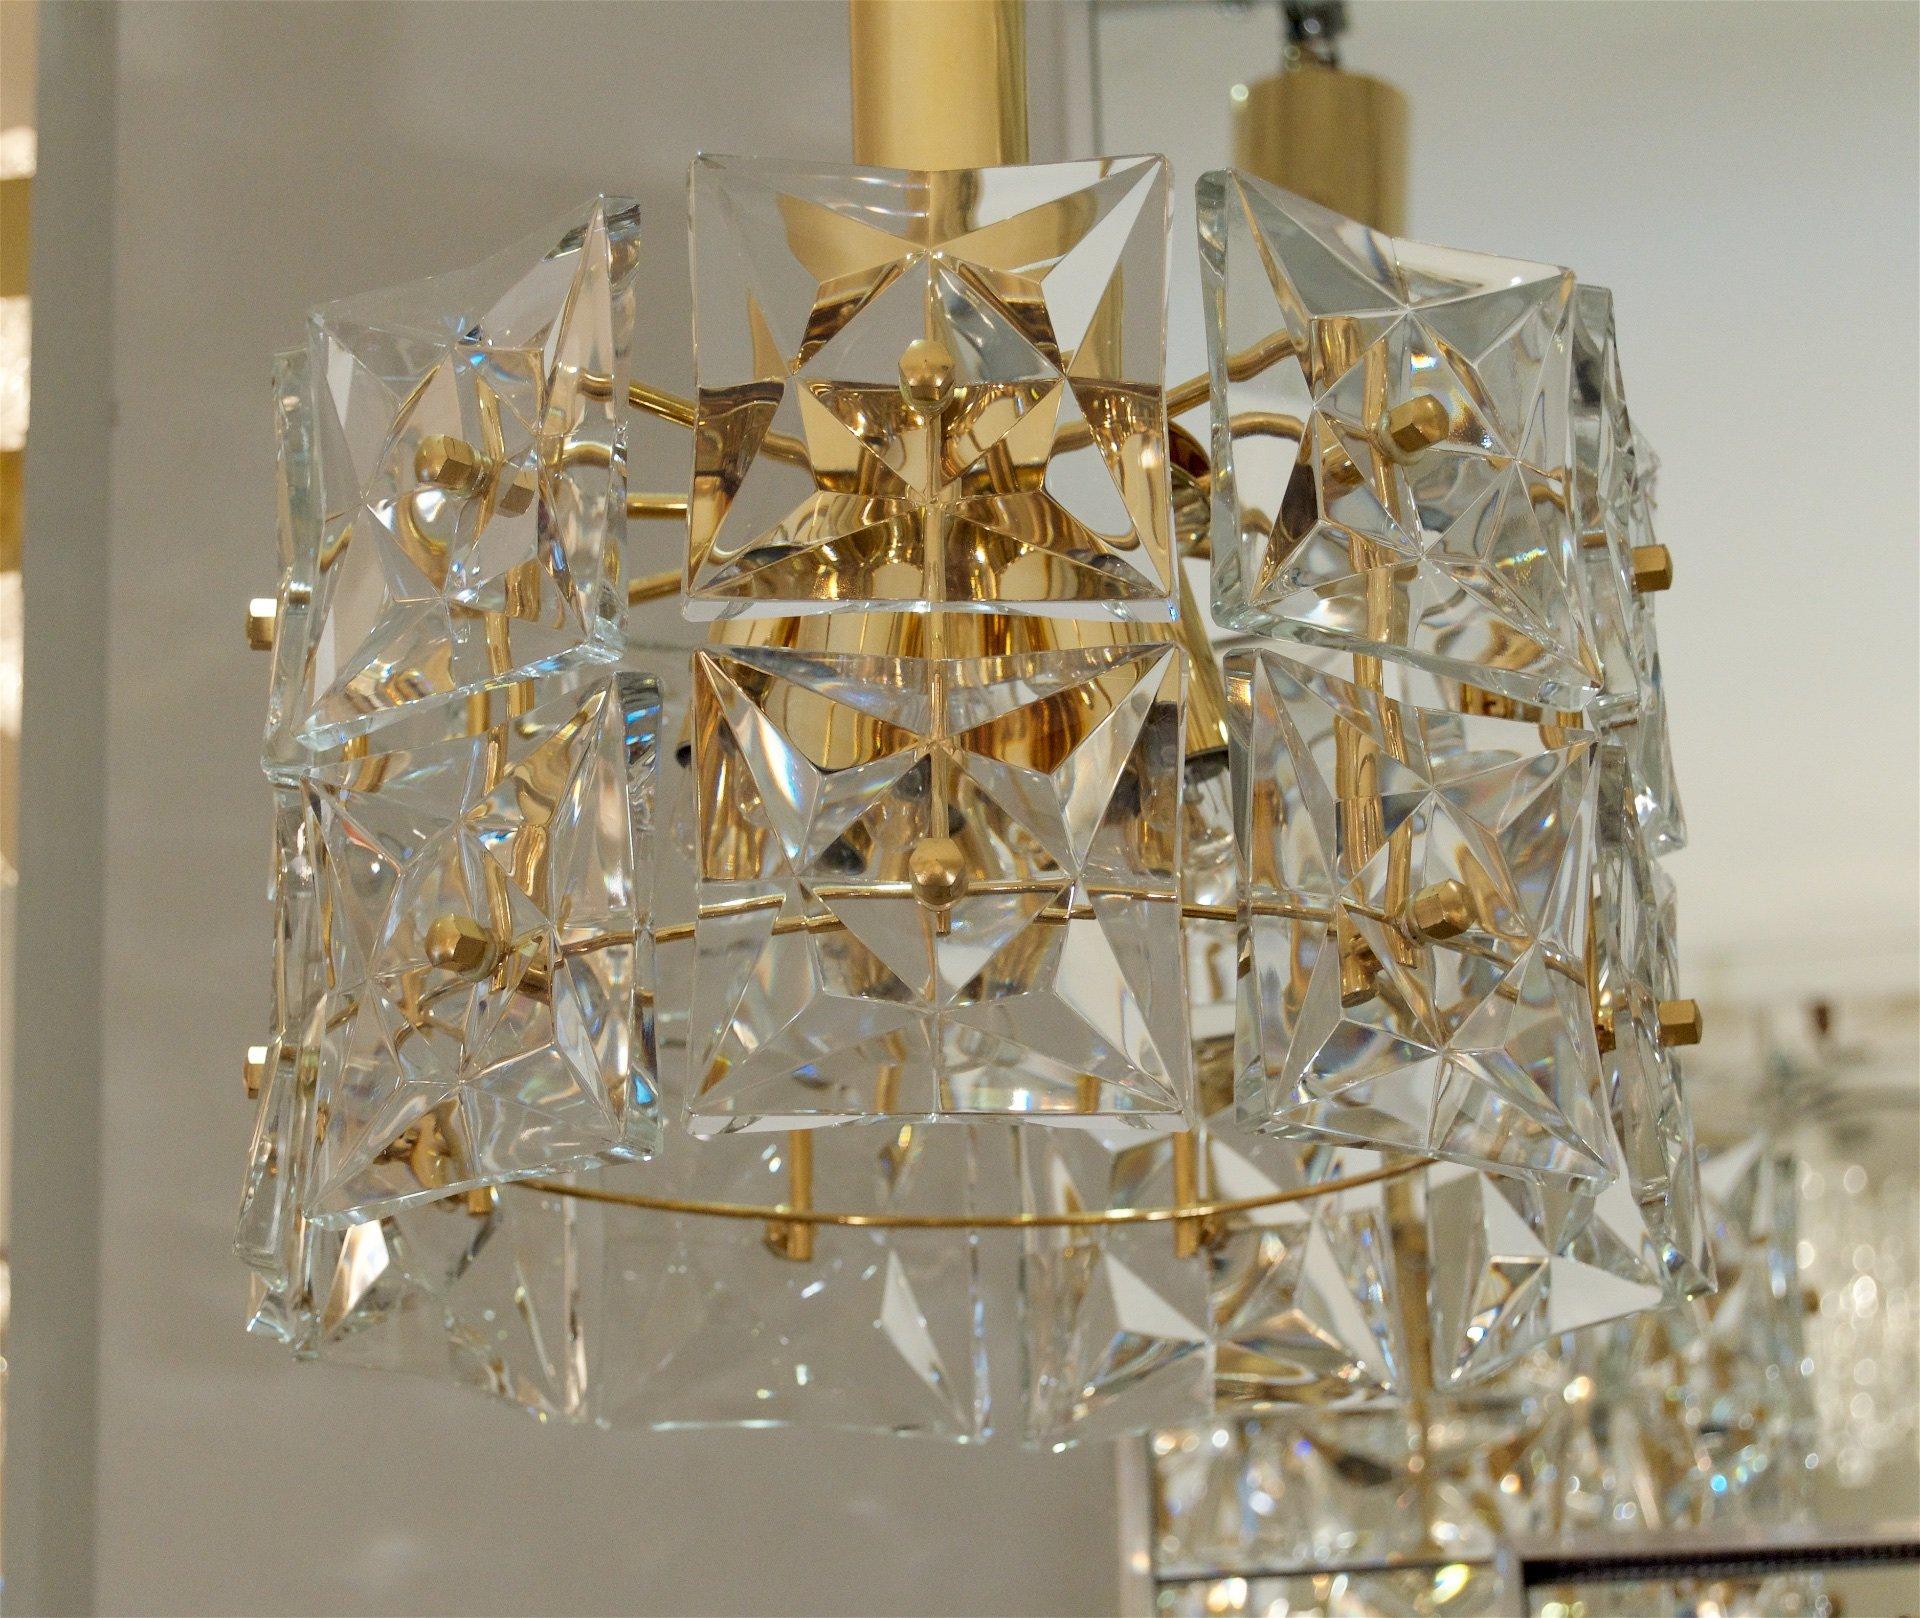 Two-Tier Goldplate Drum-Form Chandelier with Square Crystals by Kinkeldey In Good Condition For Sale In Stamford, CT